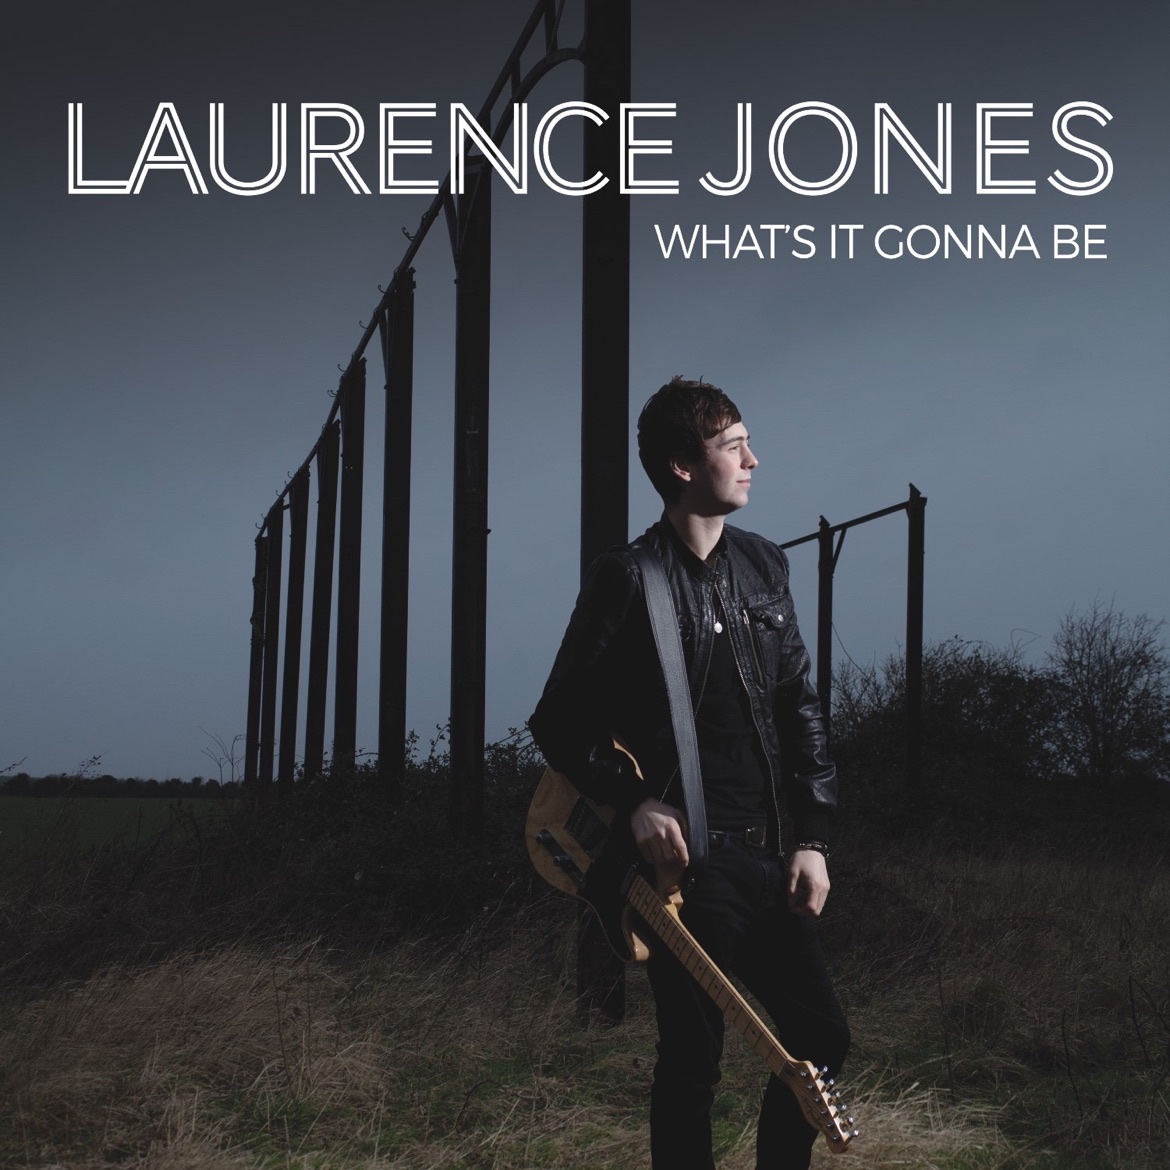 #nowplaying: 'Don't Need No Reason' from 'What's It Gonna Be' by #LaurenceJones